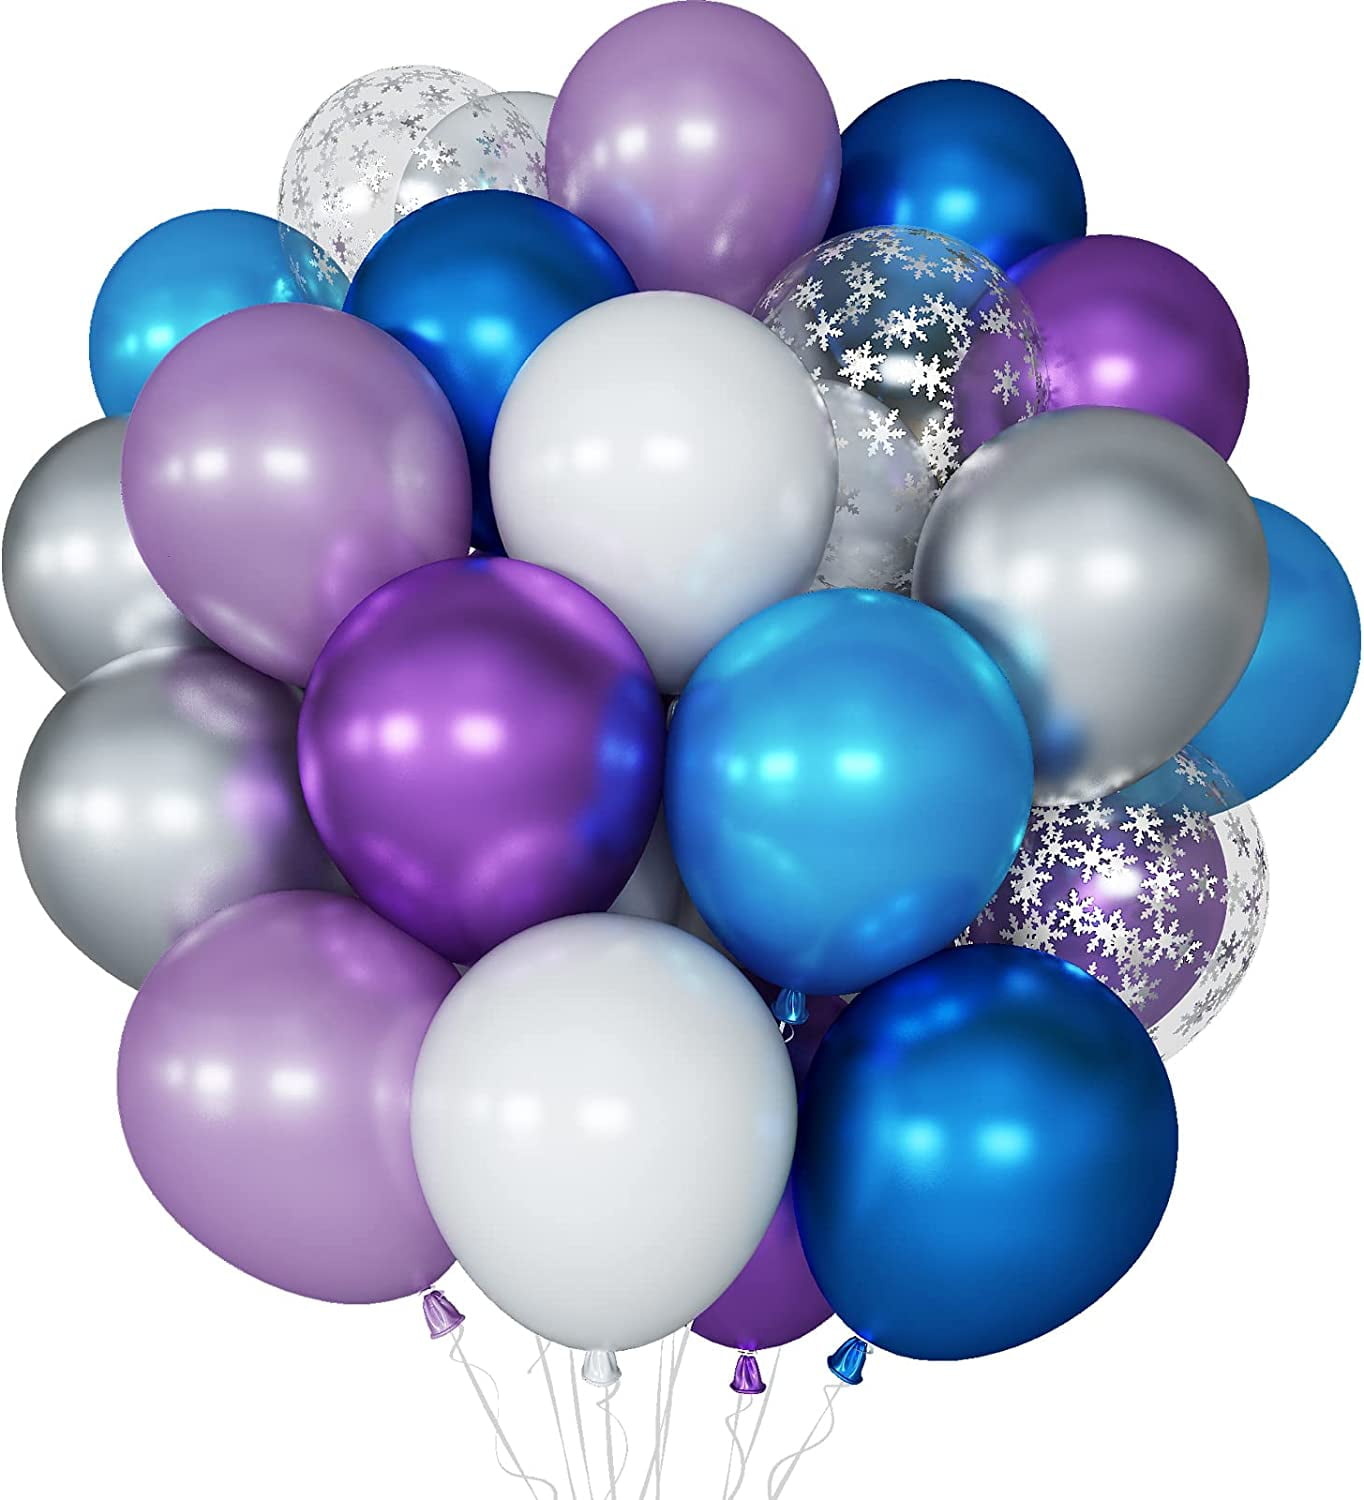 Blue and Purple Balloon Strings Art Print for Sale by KristenRV